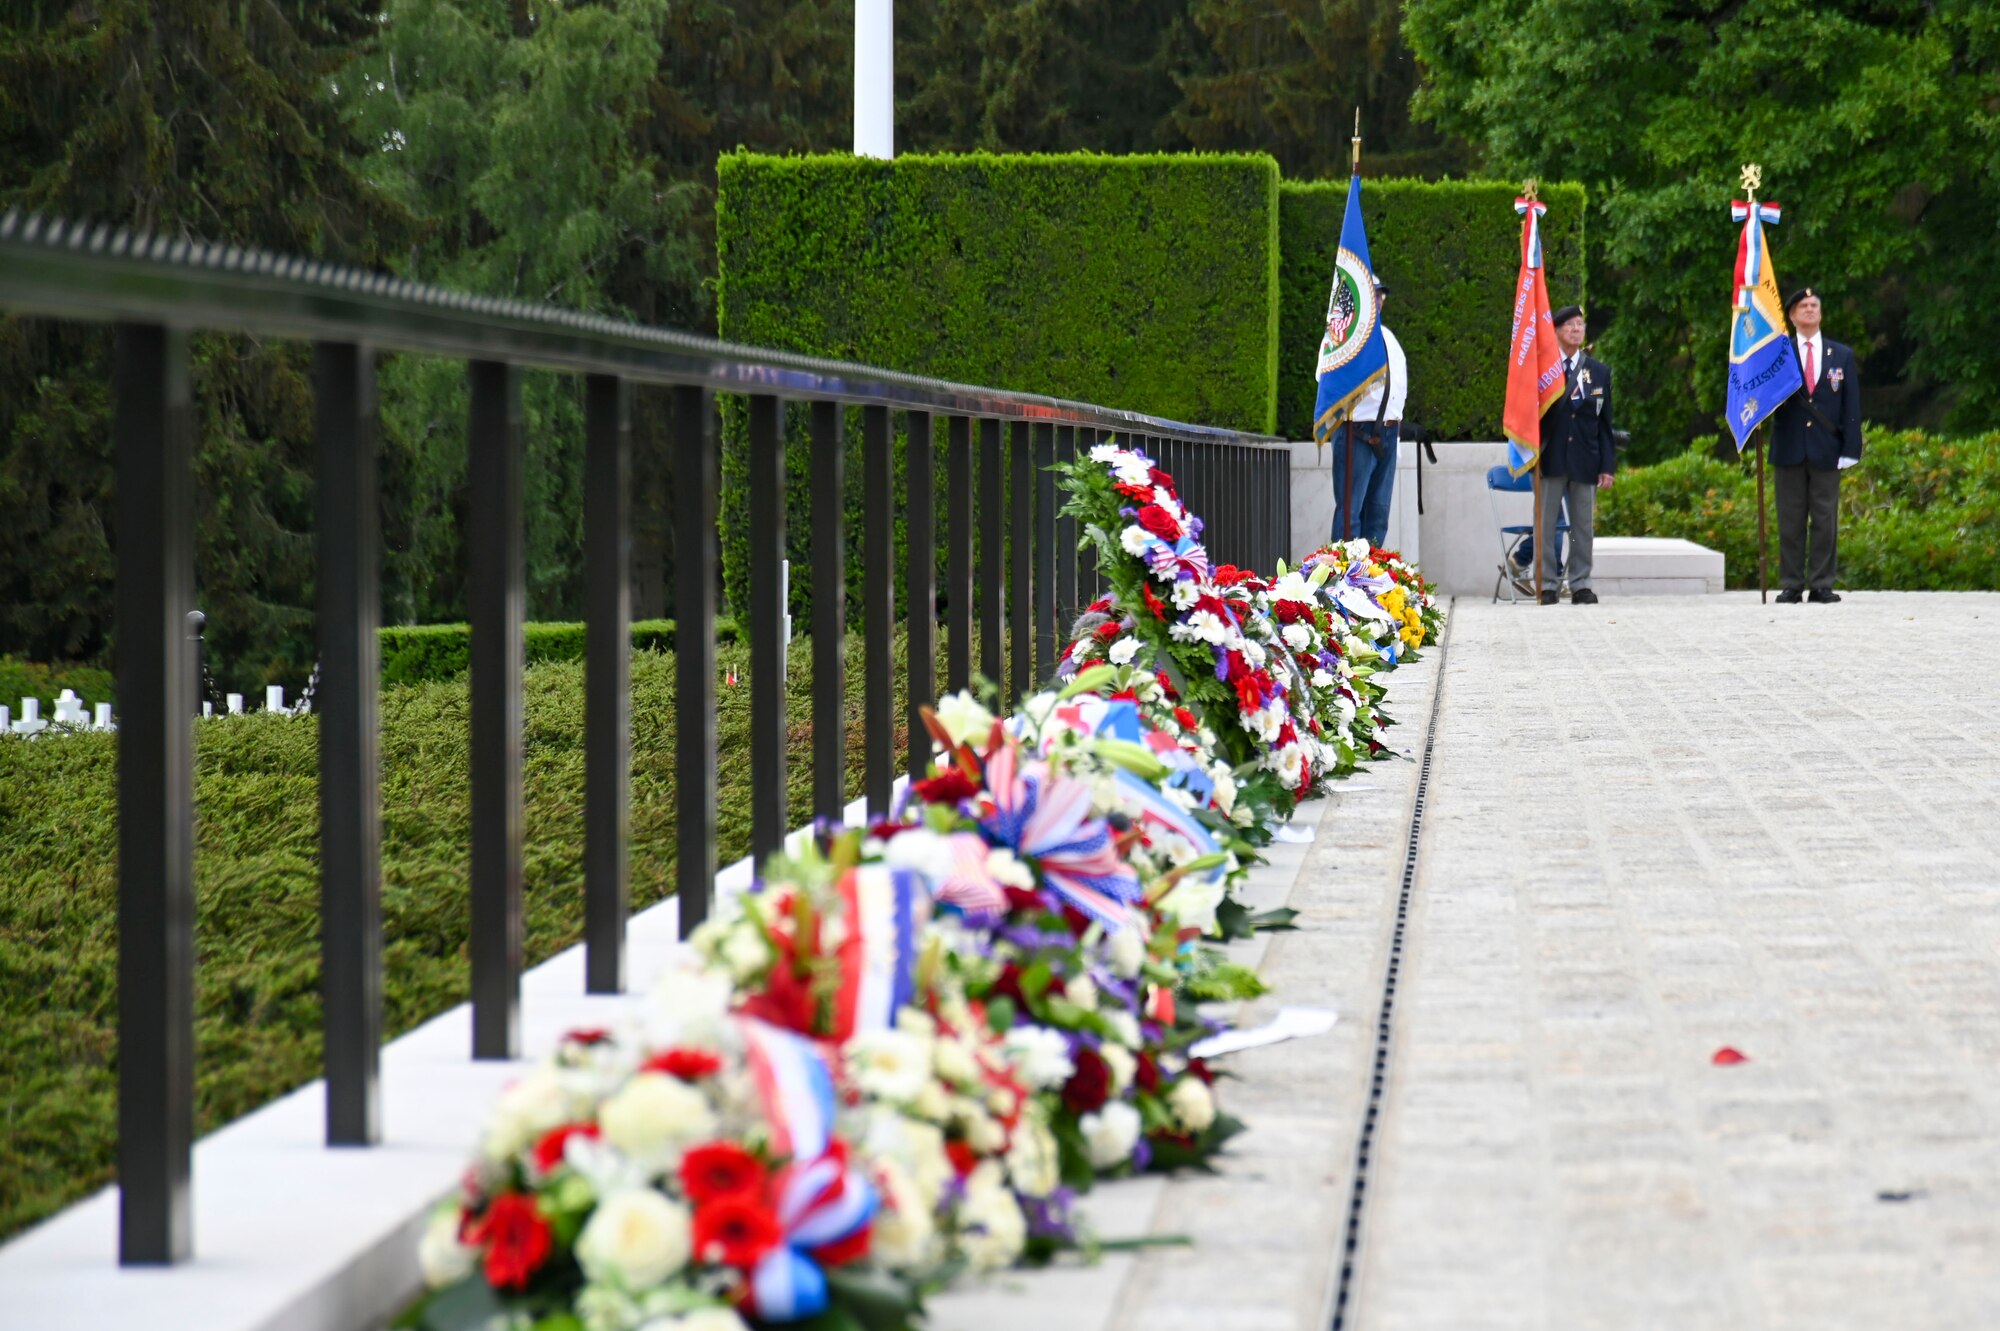 Wreaths lay on the ground during a Memorial Day event at the Luxembourg American Military cemetery in Luxembourg, May 28, 2022. U.S. and Luxembourg organizations laid wreaths in honor of the fallen service members. (U.S. Air Force photo by Airman 1st Class Jessica Sanchez-Chen)